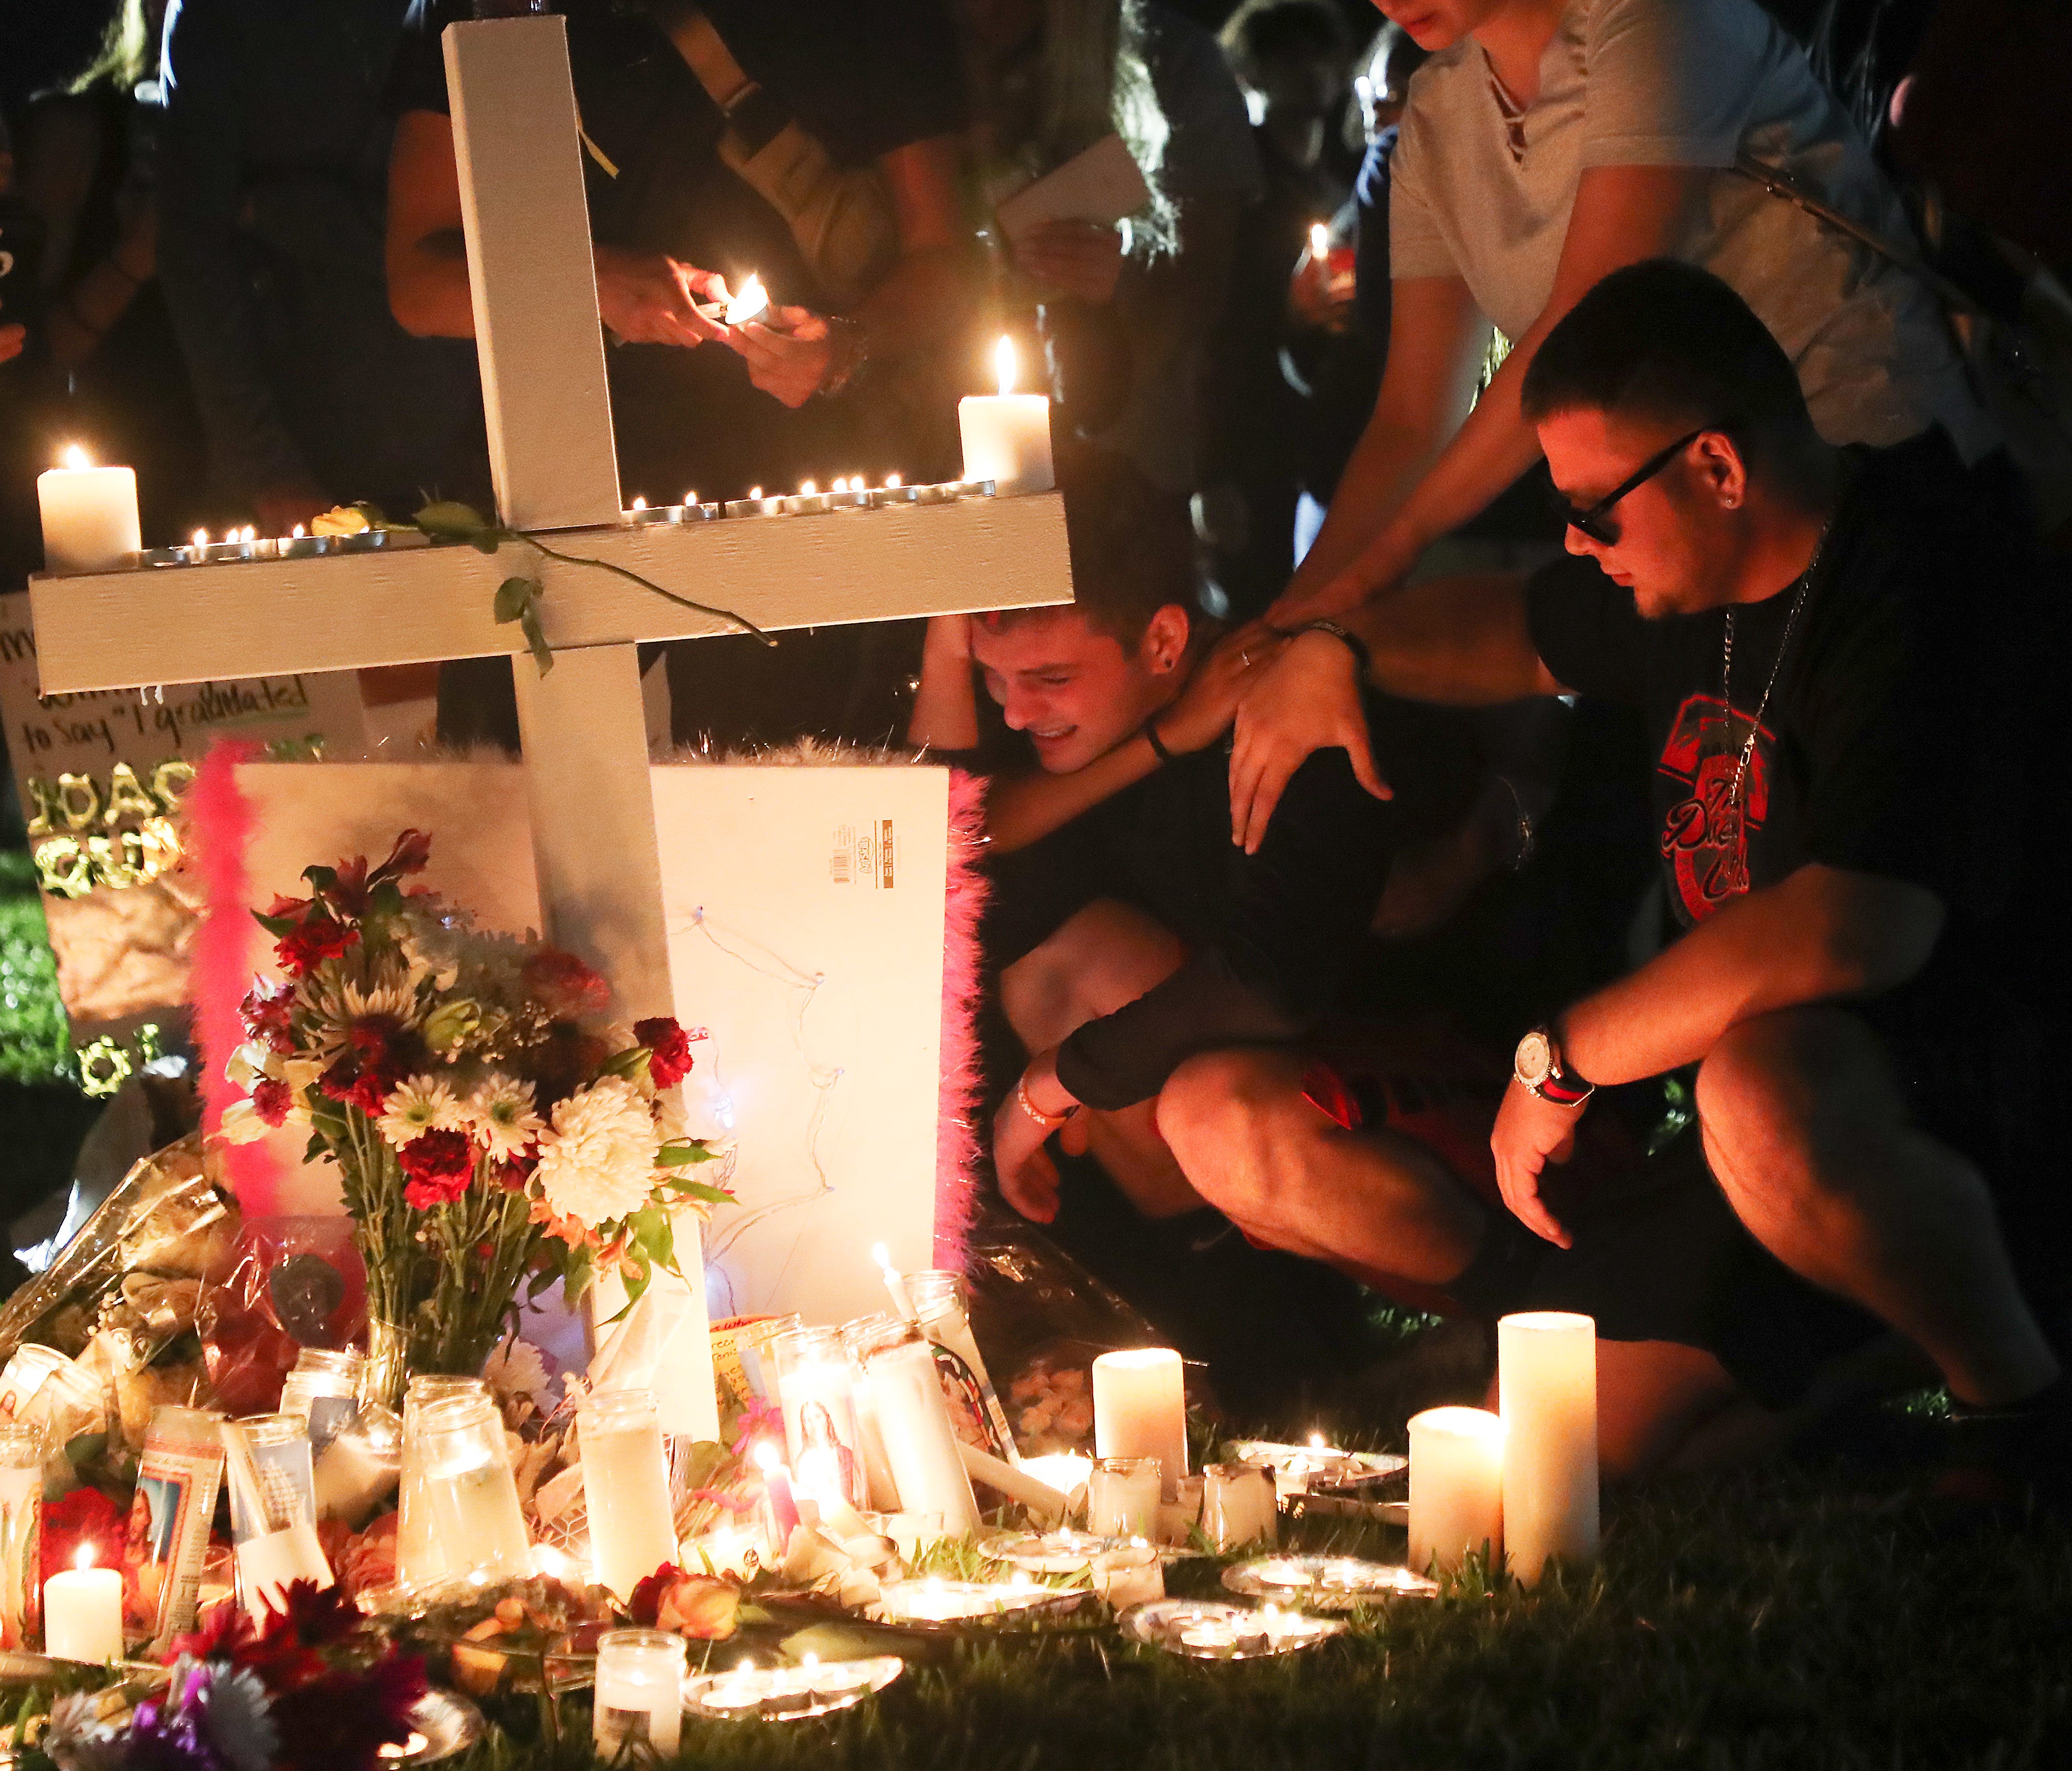 Mourners attend a candlelight vigil for those slain and injured in a mass shooting at Marjory Stoneman Douglas High School at the Parkland, Fl,  Amphitheatre on Thursday 2/15/2018. Thousands were in attendance.